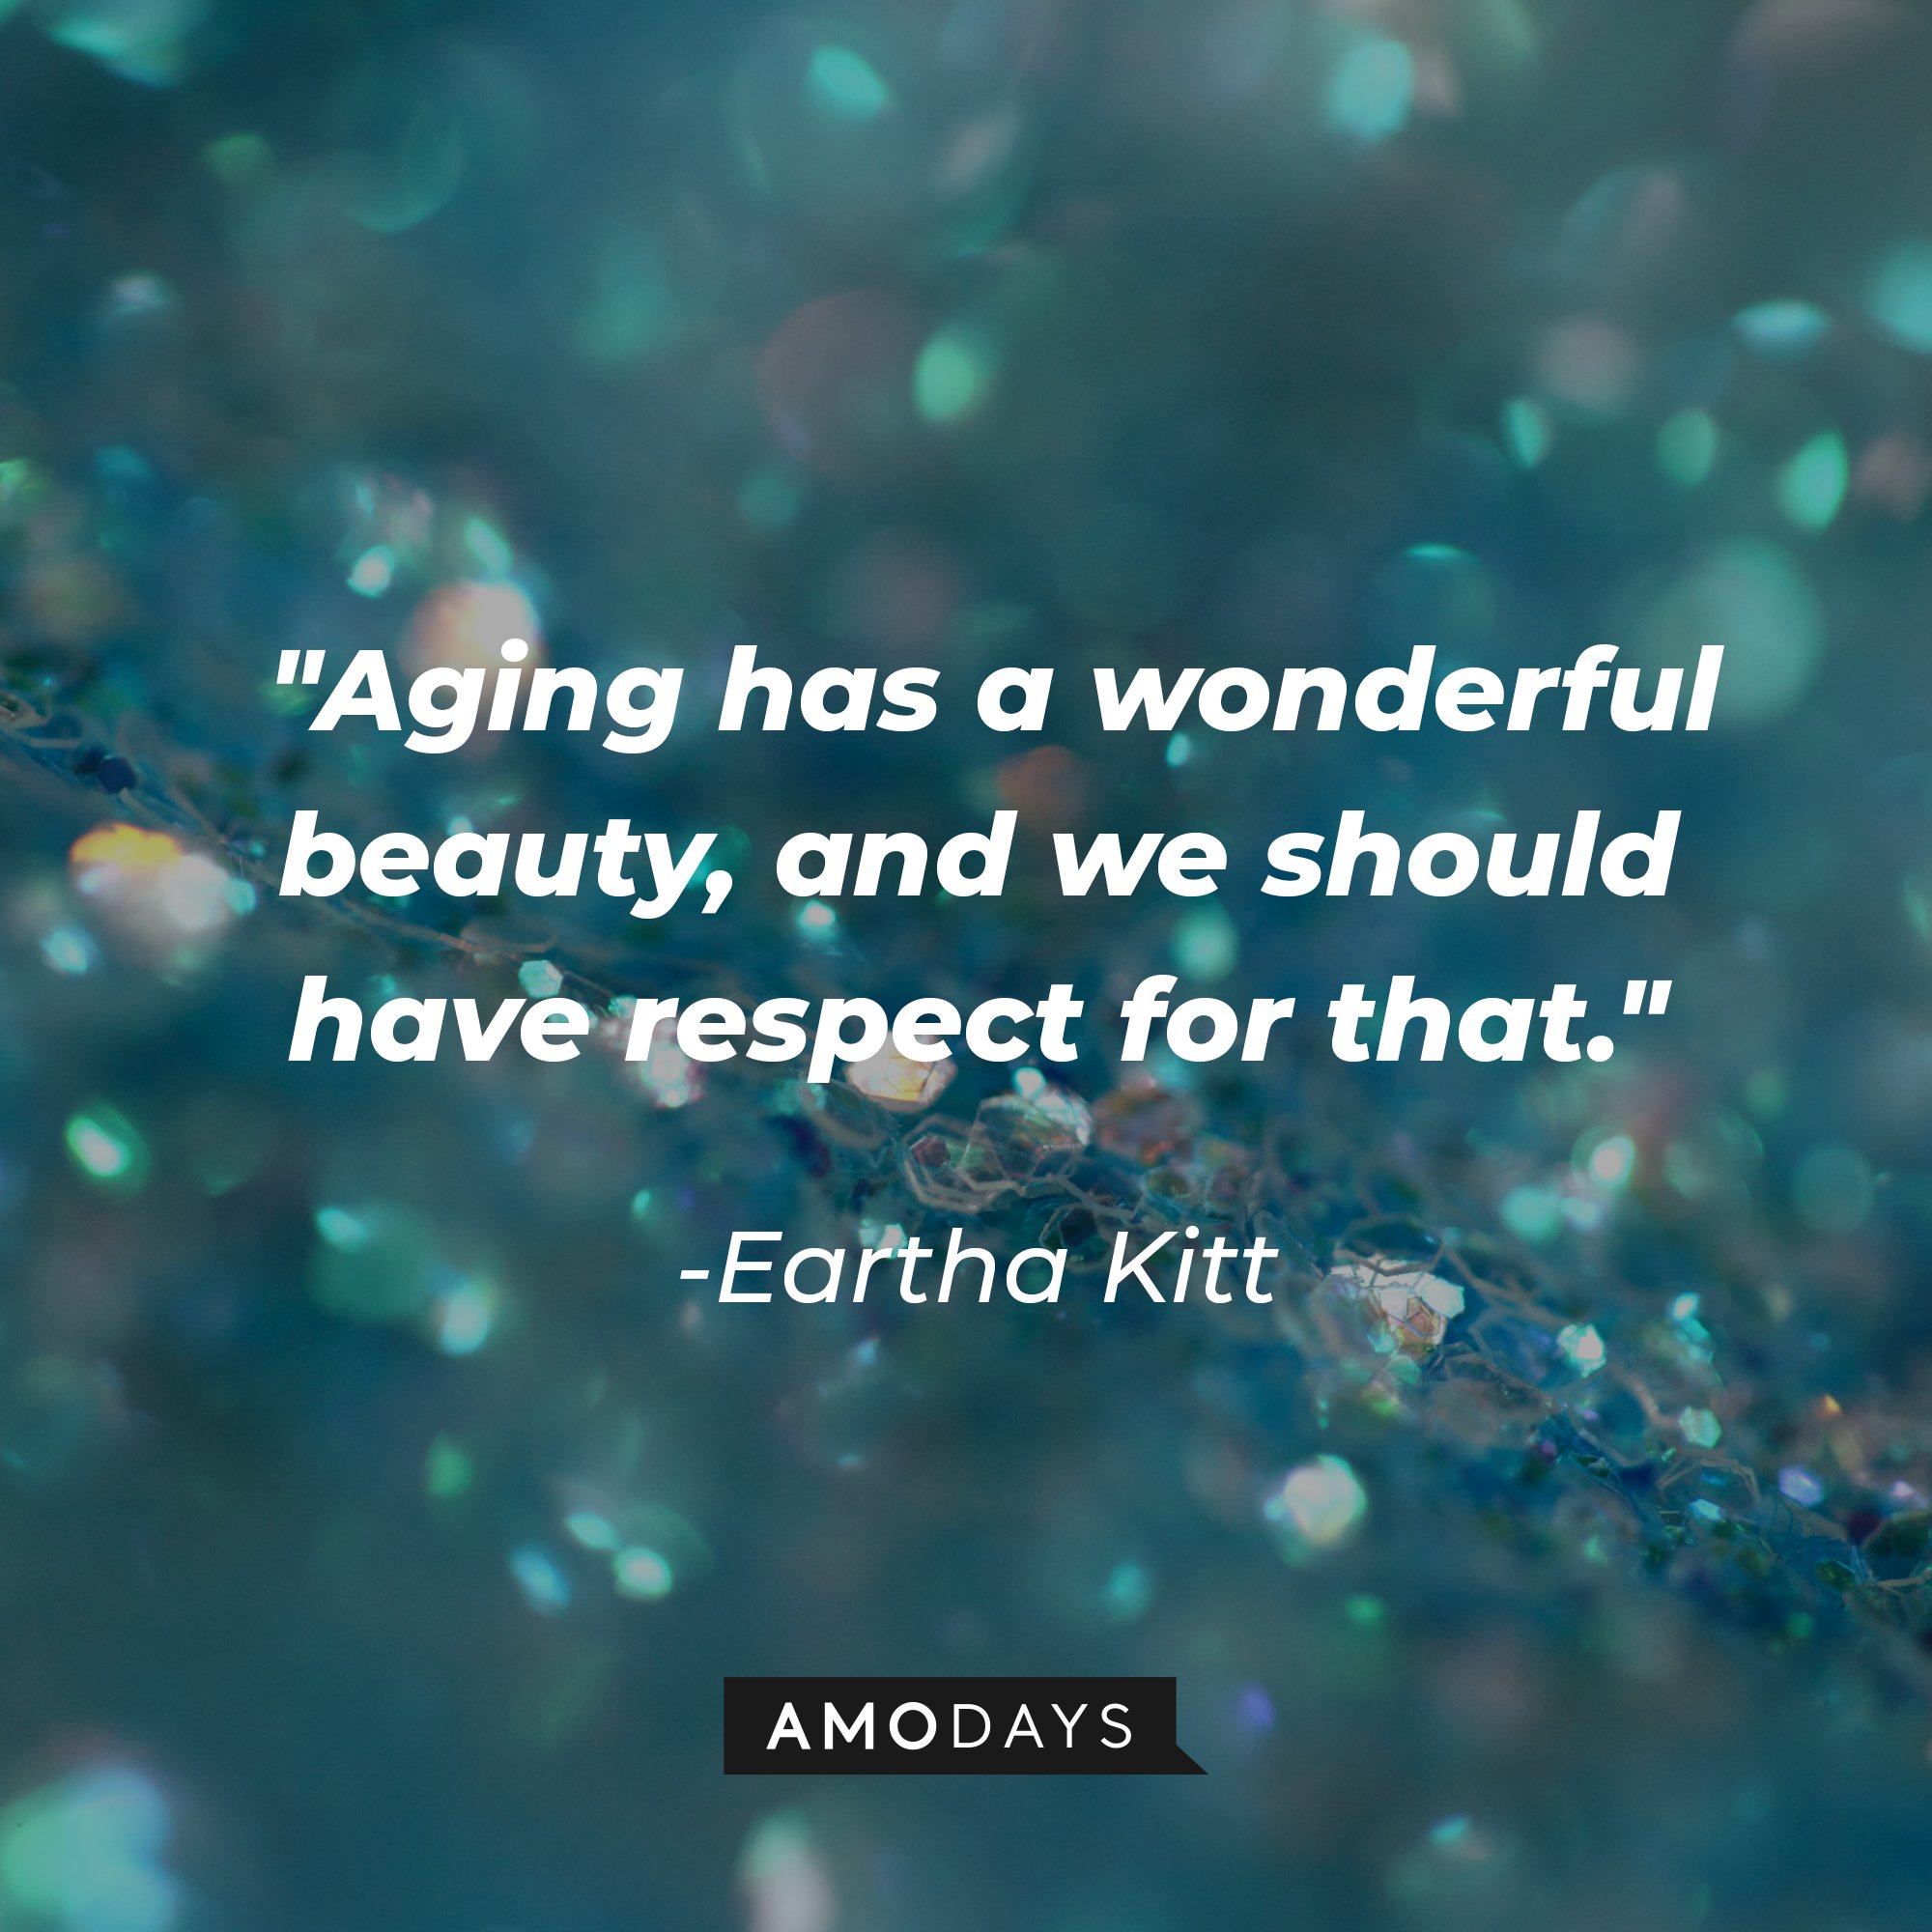 Eartha Kitt’s quote: "Aging has a wonderful beauty, and we should have respect for that." | Image: AmoDays